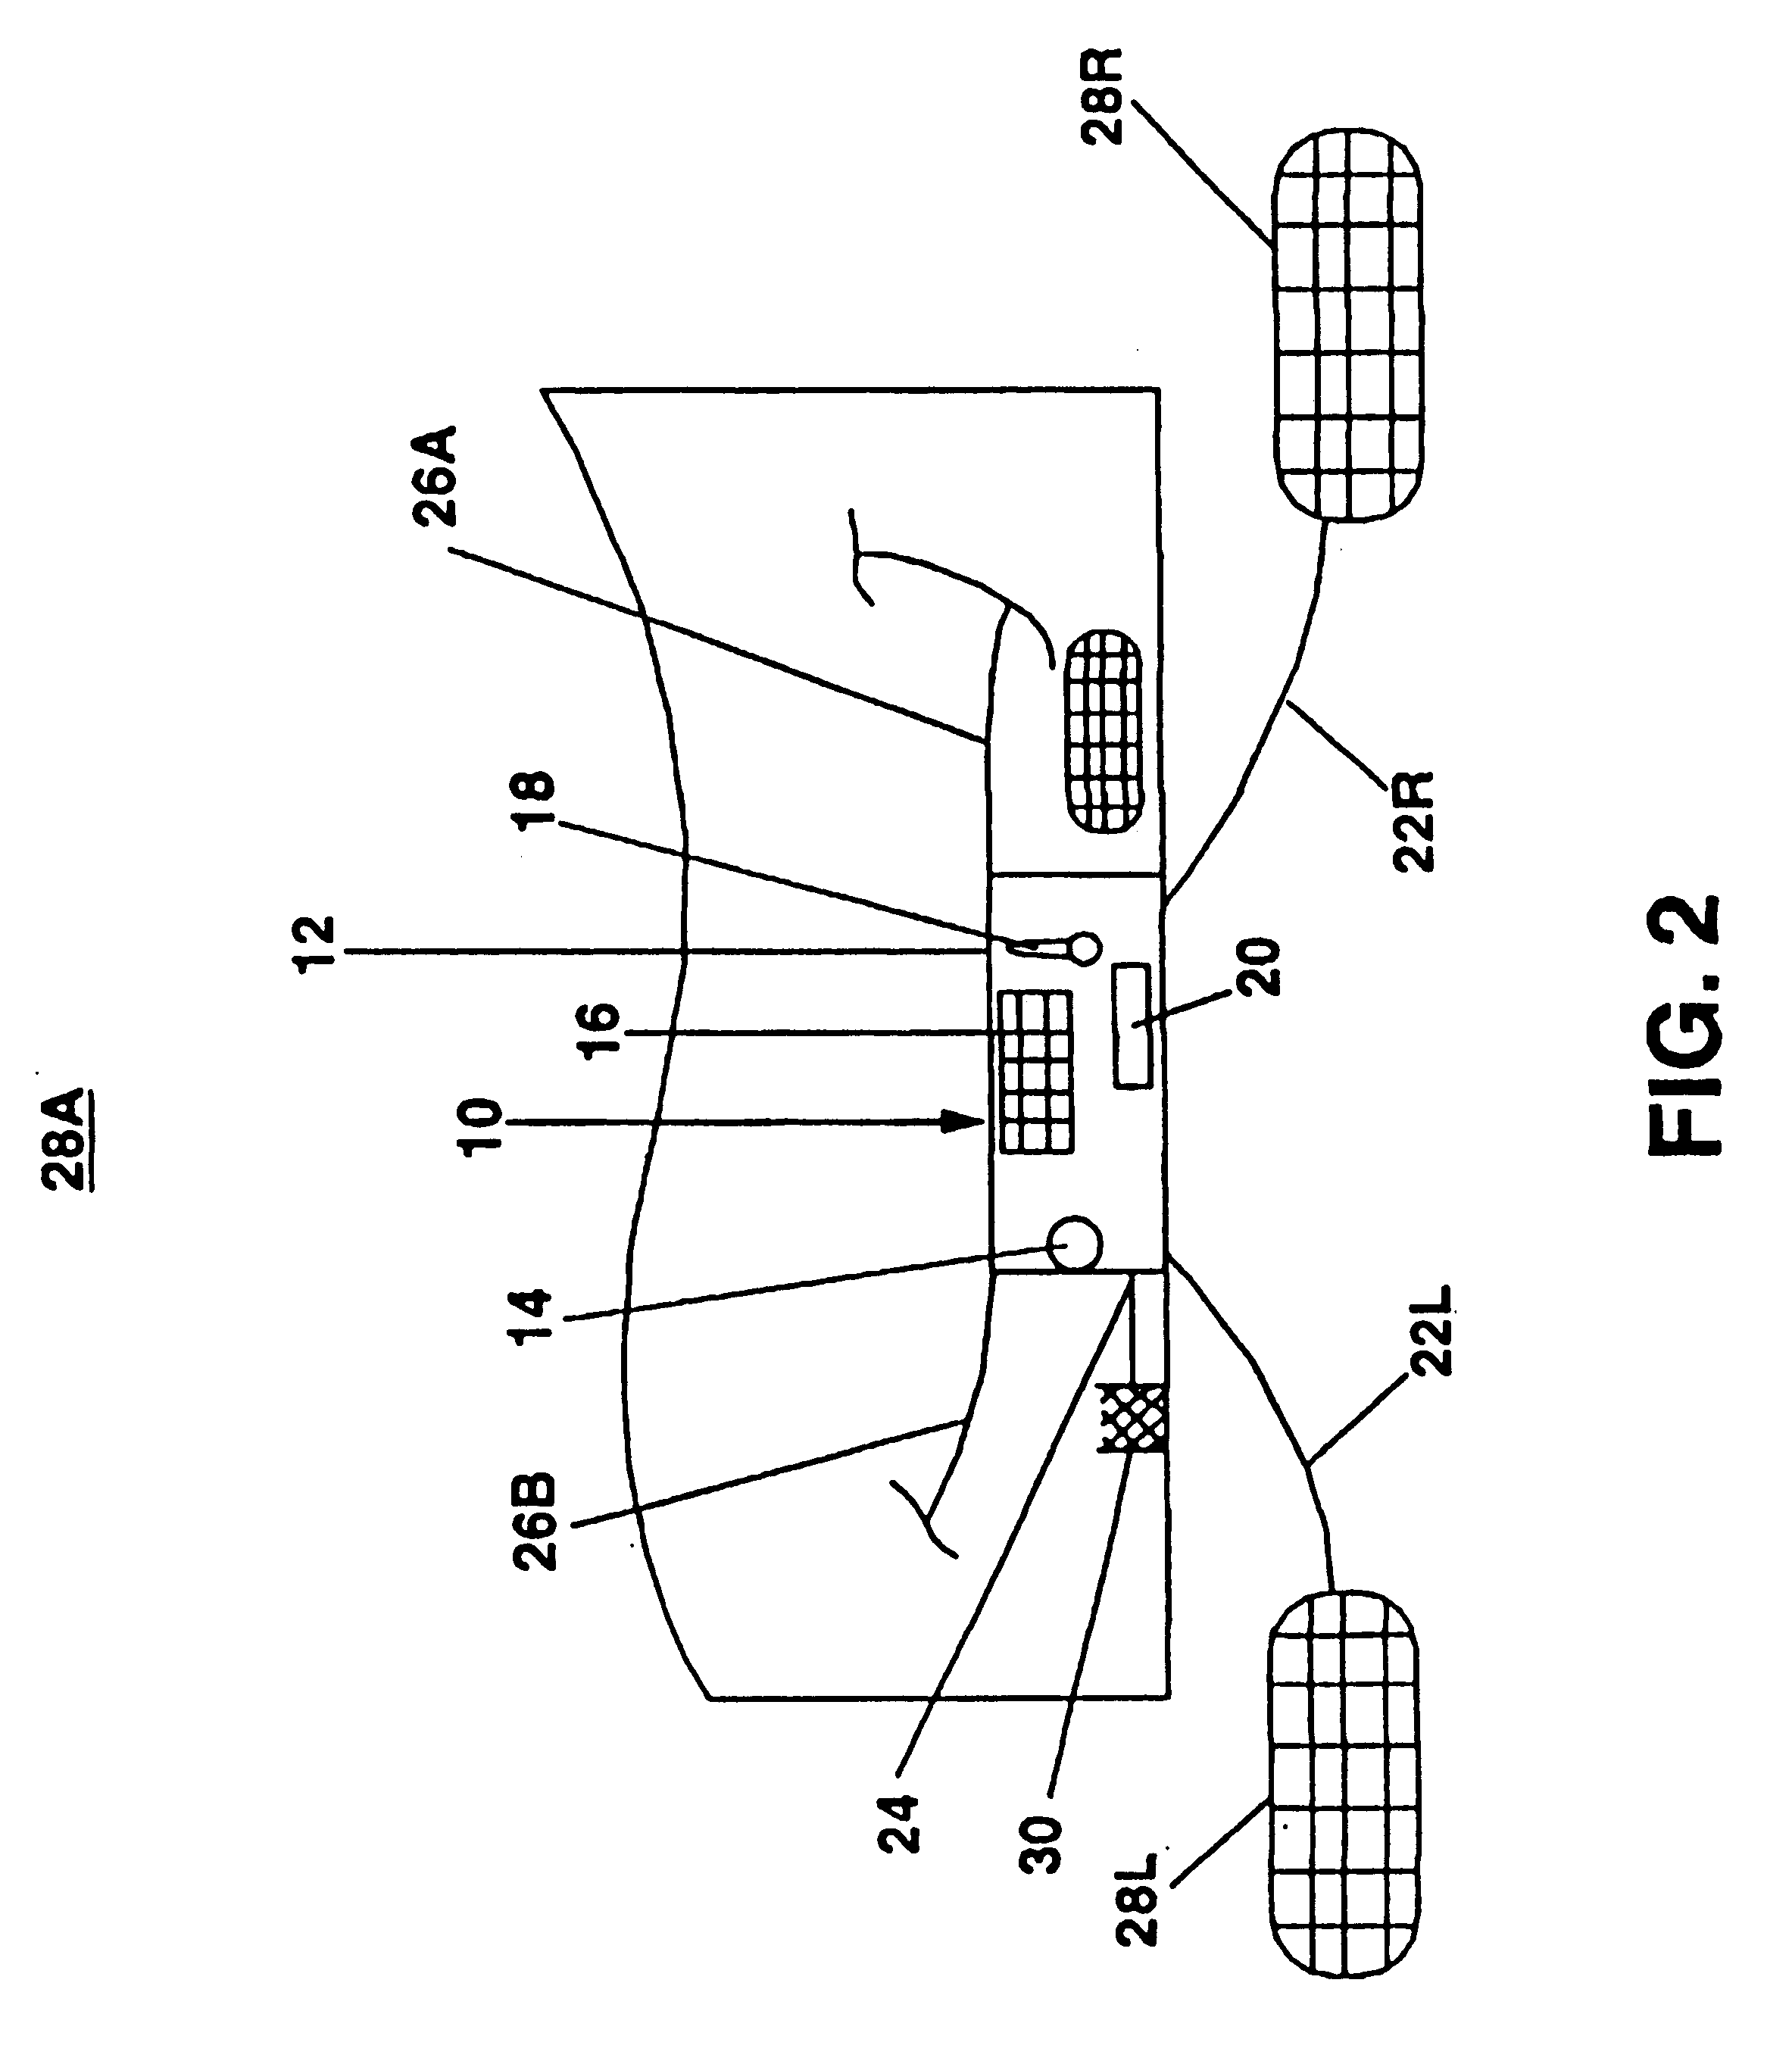 Apparatus for preventing confinement in a vehicle trunk